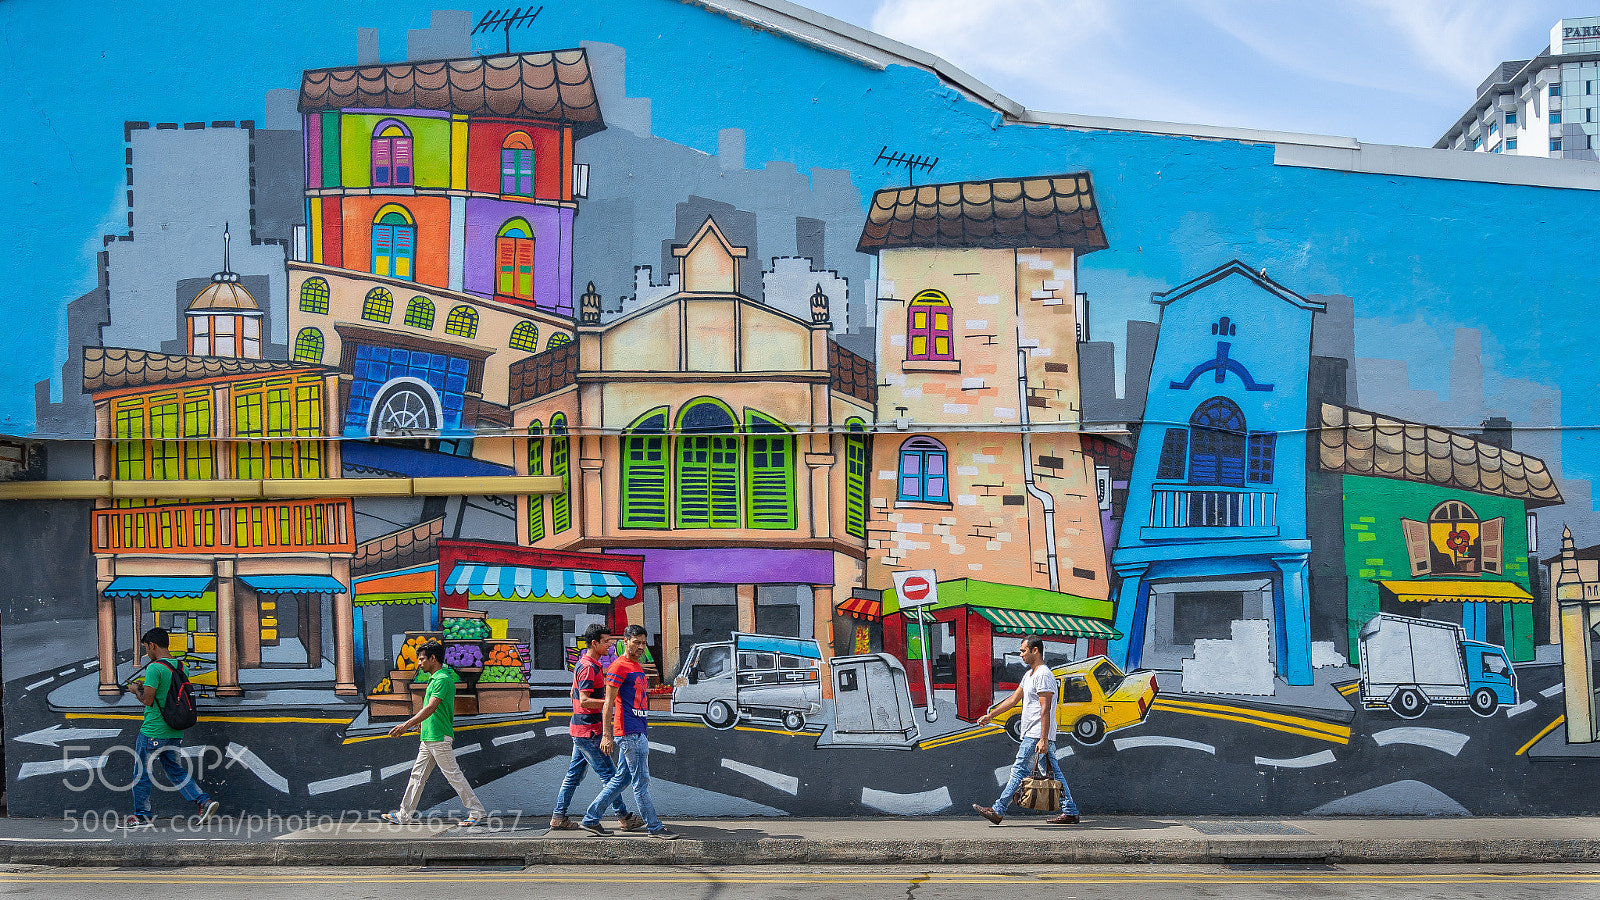 Sony a7 sample photo. Mural in little india photography